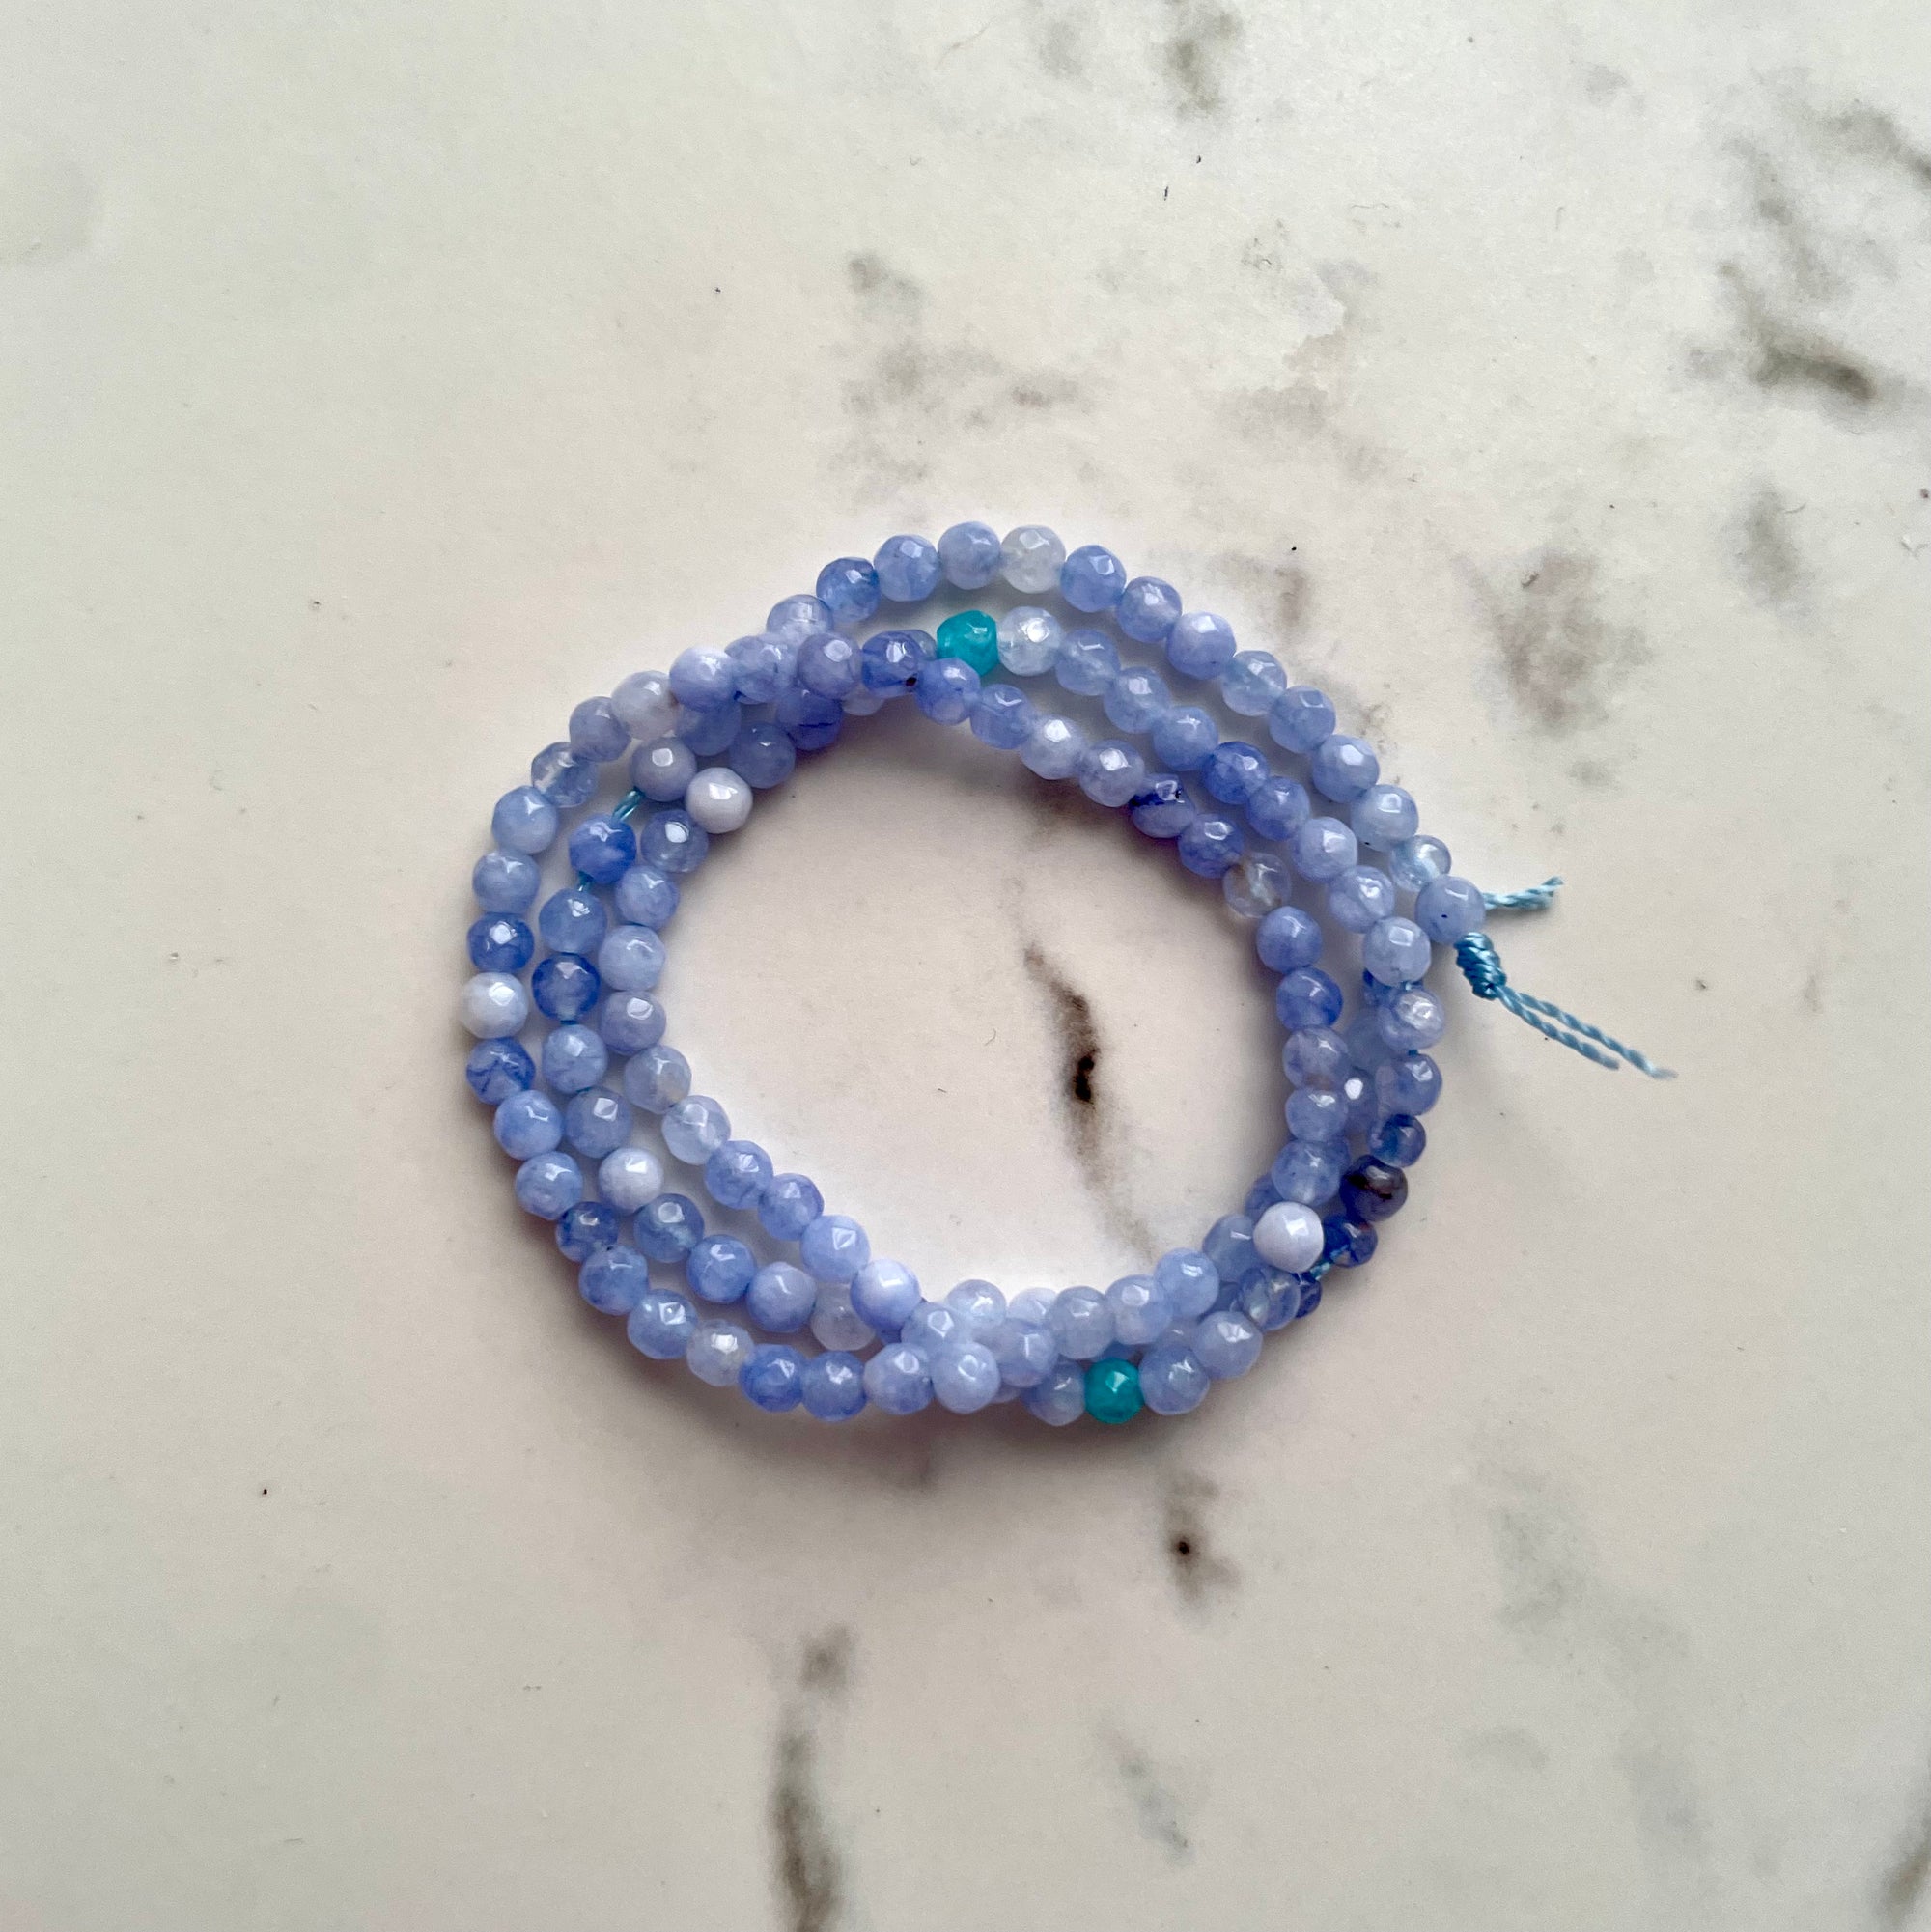 Strung Beads - Black, Grey, and Blues